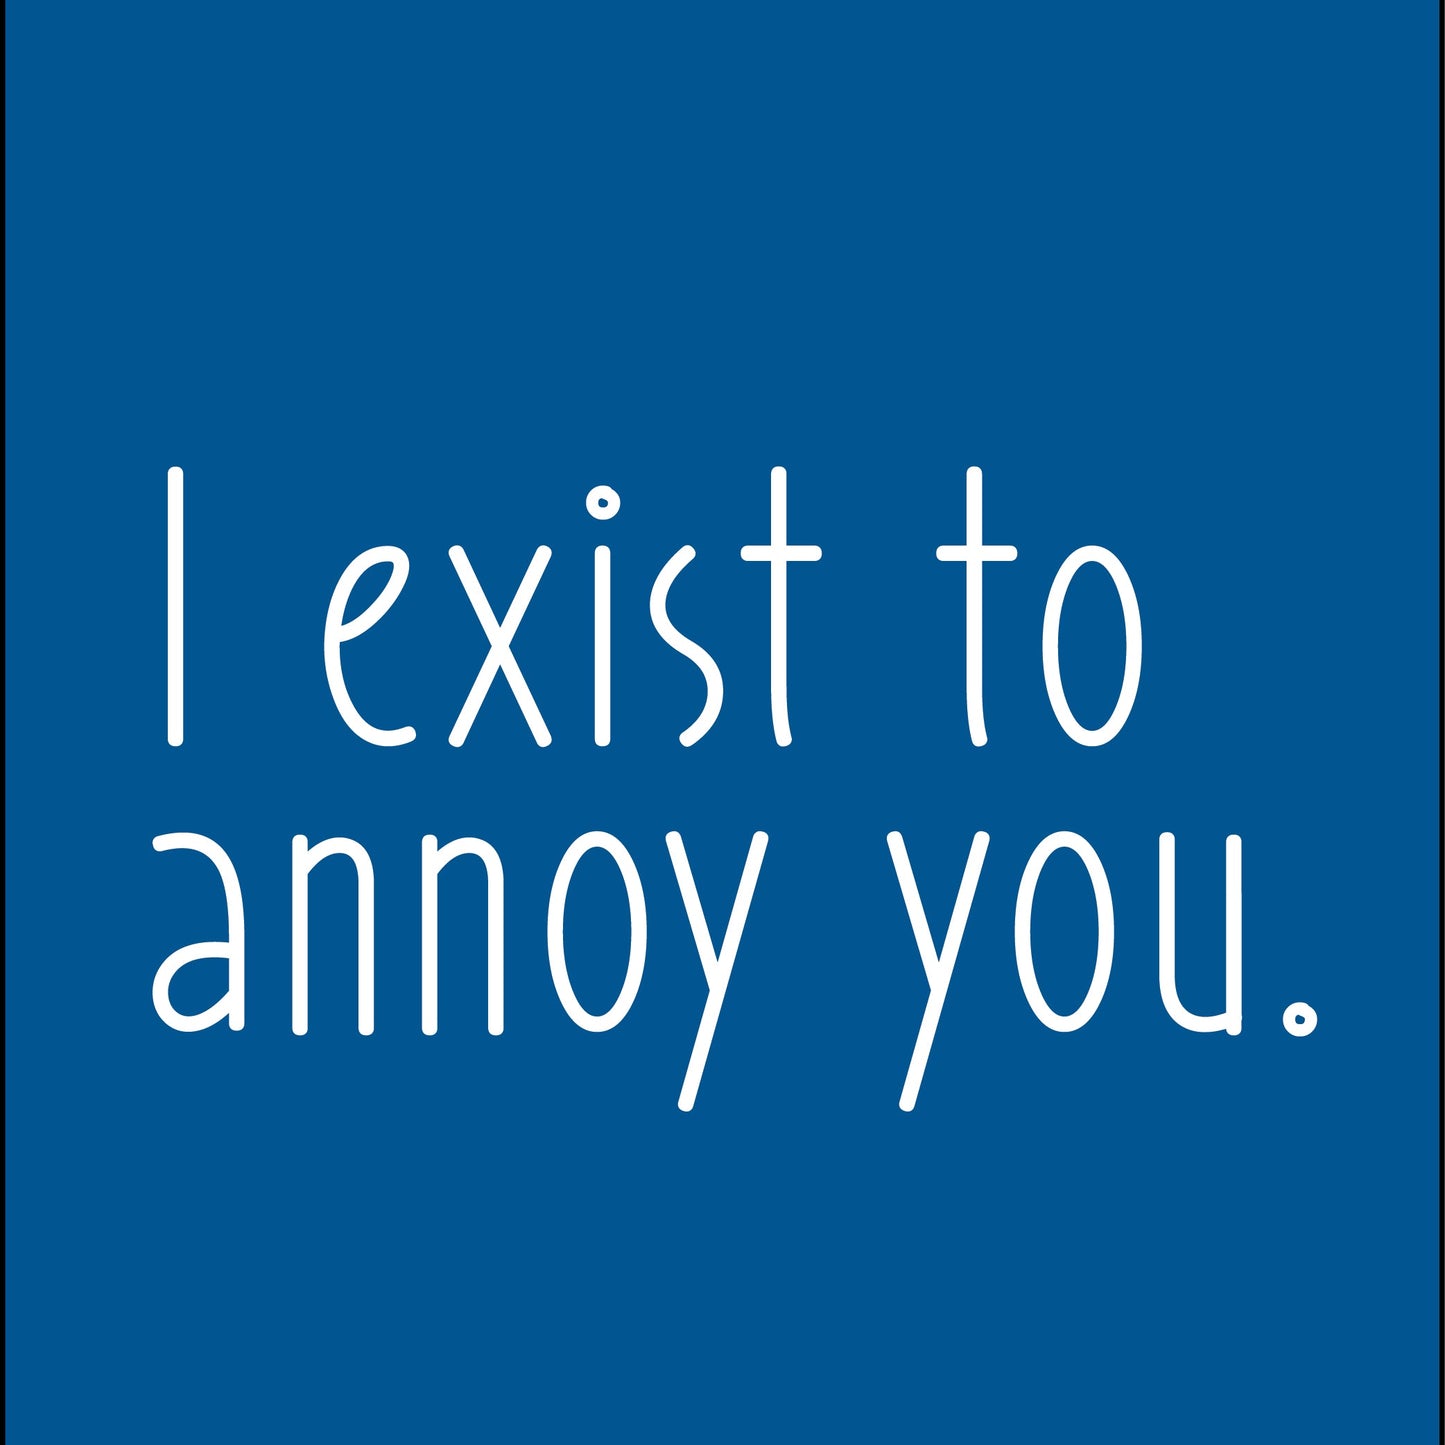 I exist to annoy you.